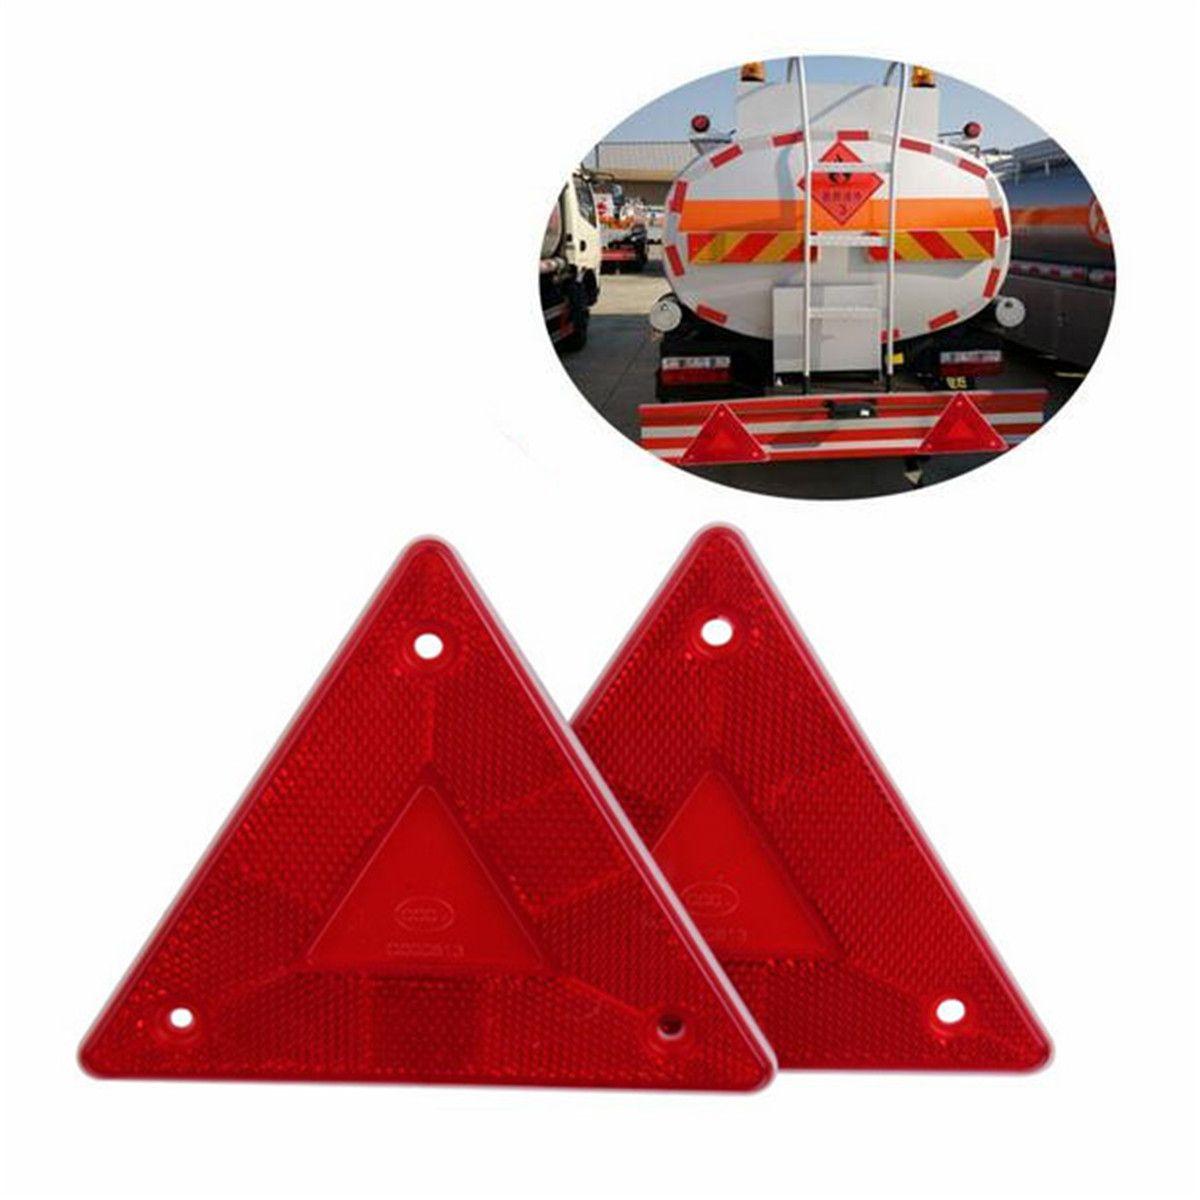 Red Triangular Automotive Logo - Details about Pairs Red Triangular Side Red Reflectors For Rear Triangle Truck Caravan